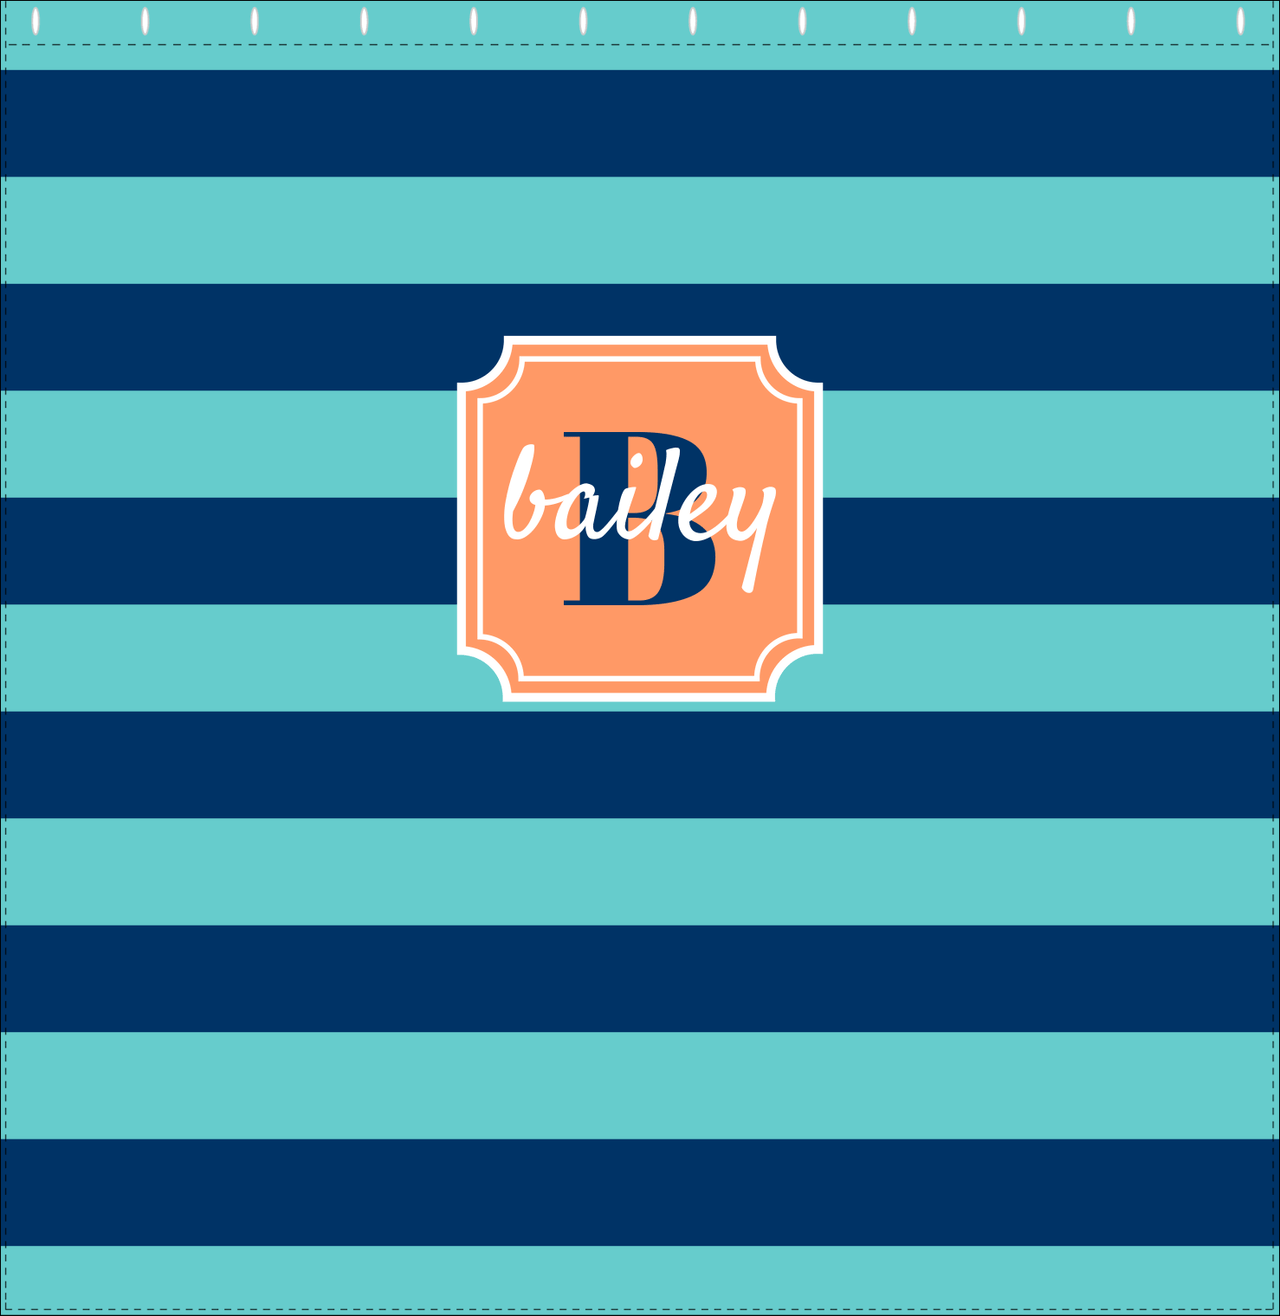 Personalized Striped Shower Curtain - Blue and Orange - Stamp Nameplate - Decorate View